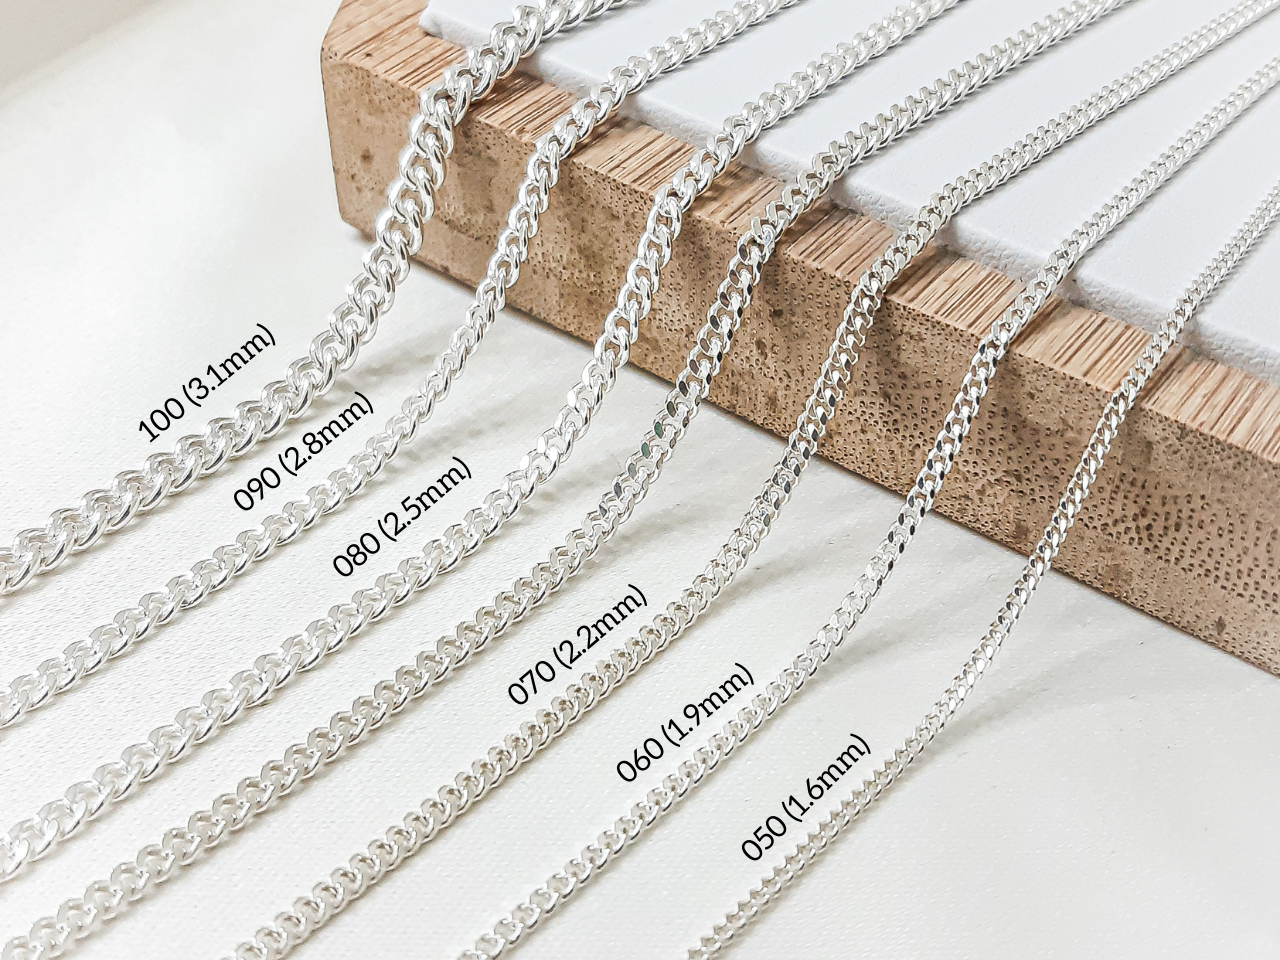 Curb Chain Necklace 925 Silver